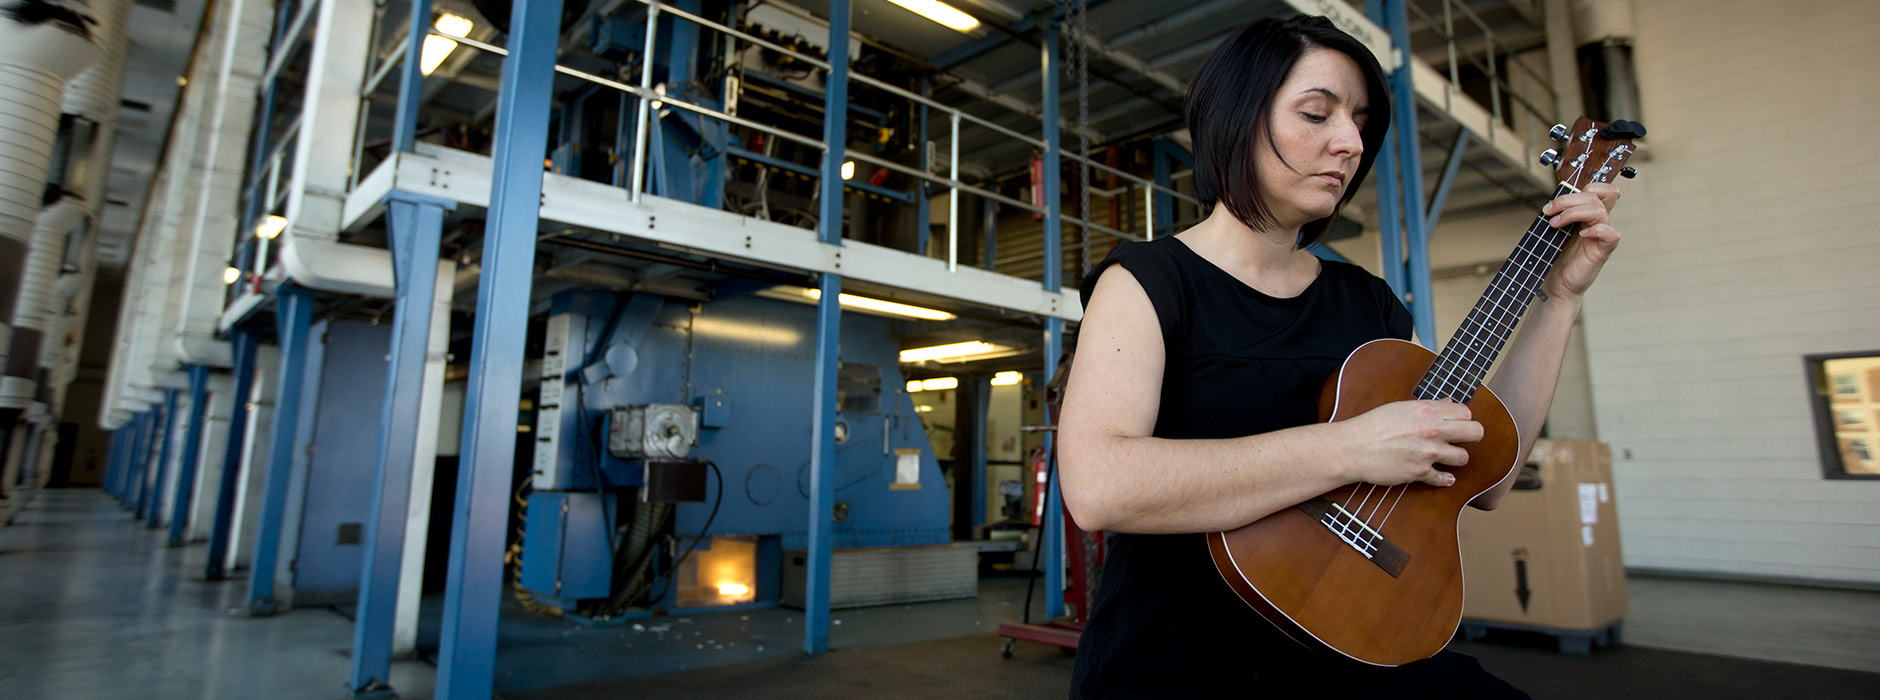 Dena Woods plays a ukulele during a performance on Monday, Feb. 3, 2014, in the South Bend Tribune press room in downtown South Bend. SBT Photo/JAMES BROSHER